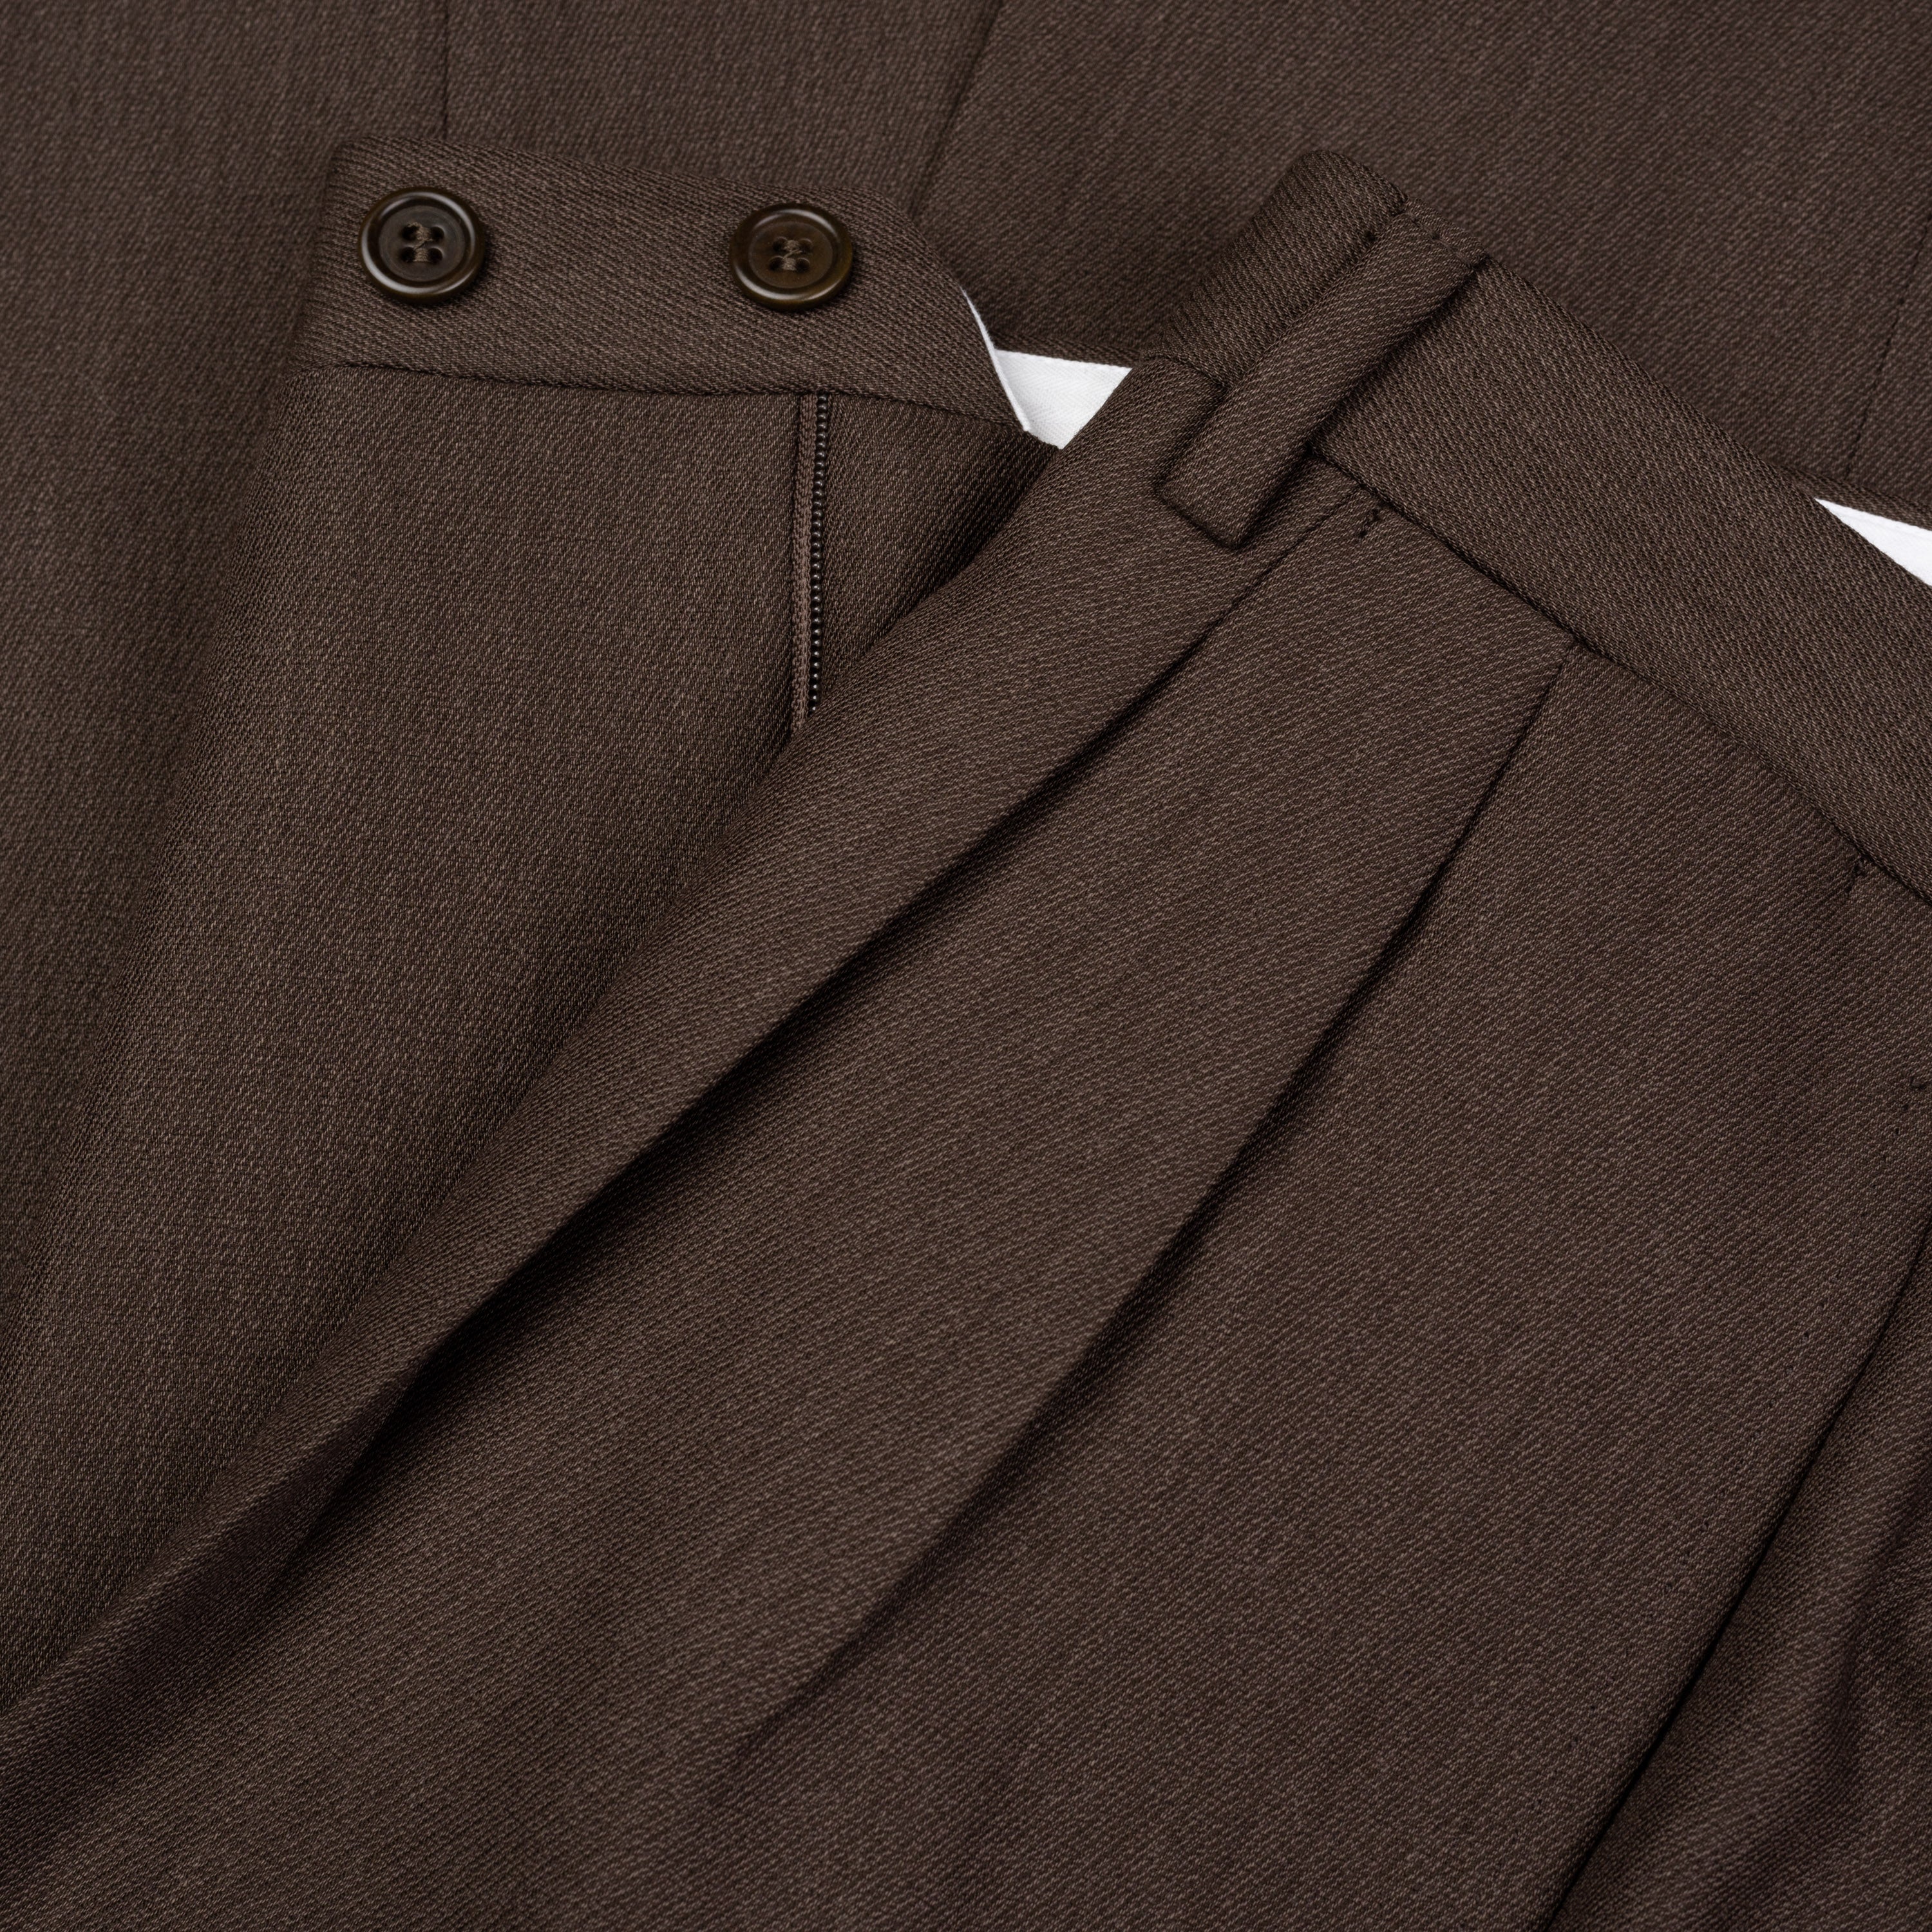 CASTANGIA 1850 Brown Wool Twill 3 Button Suit EU 52 NEW US 42 CASTANGIA